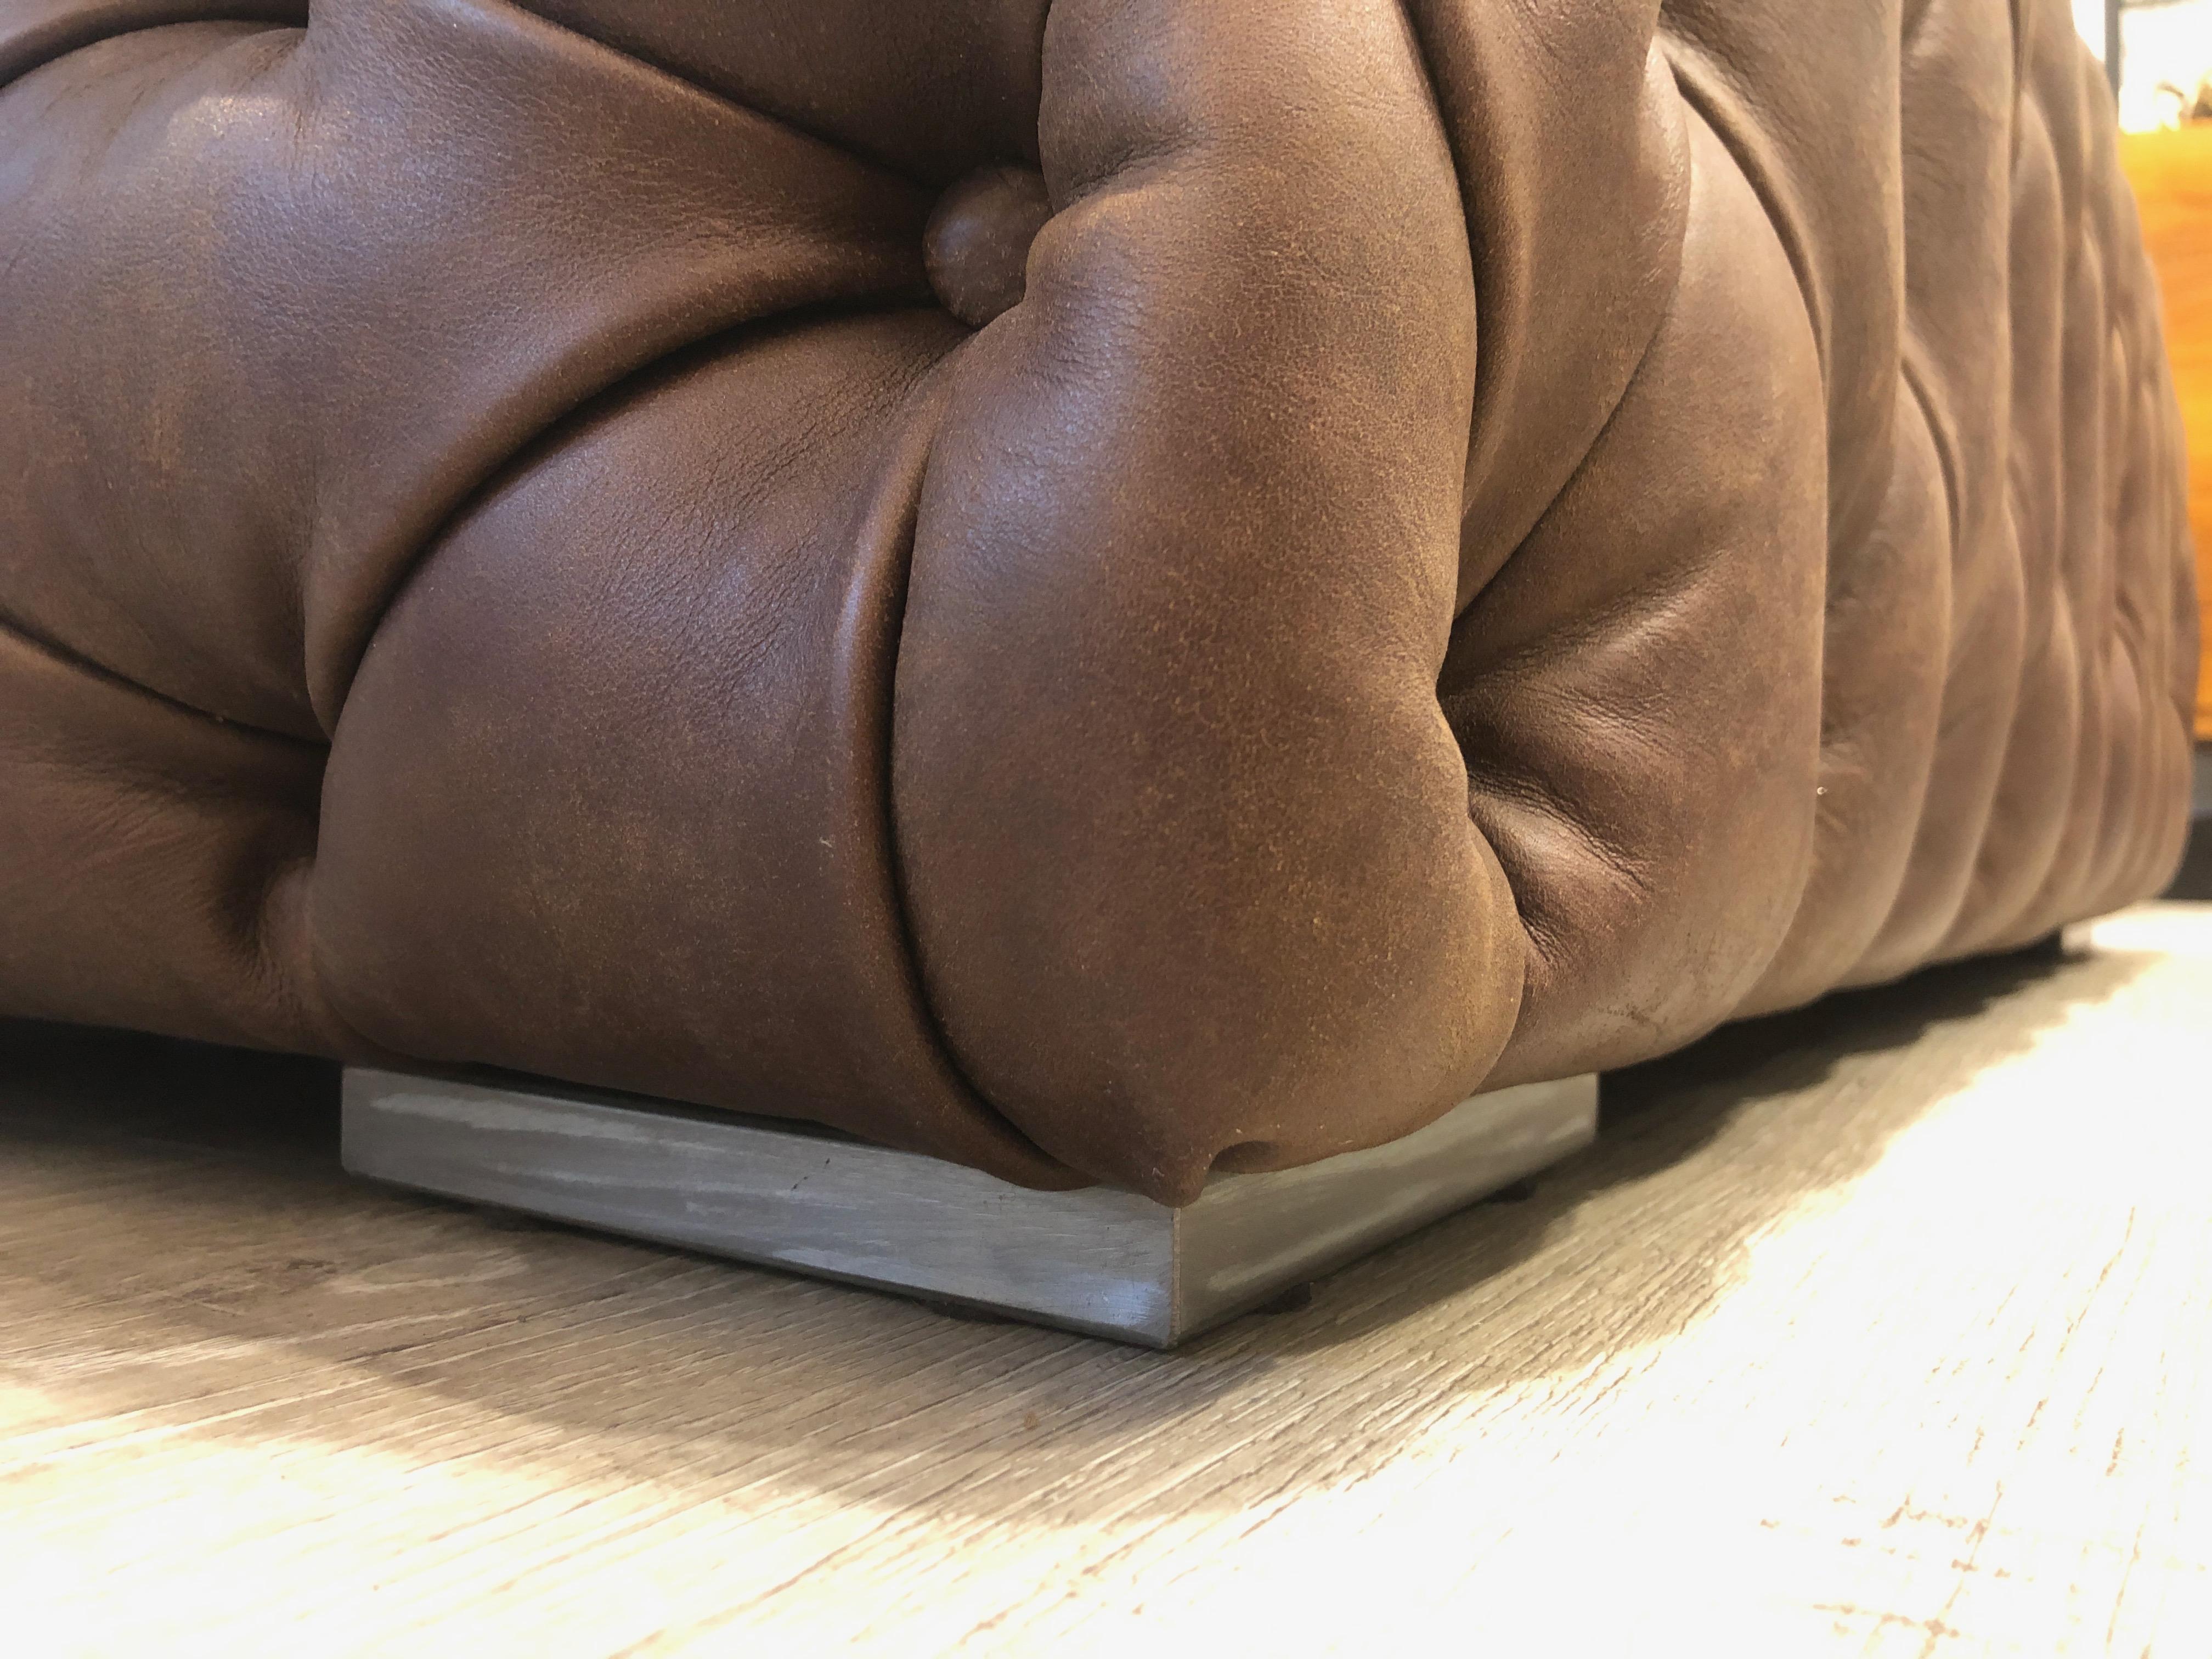 Customizable brown leather Capitonné Pouf available in other colors shape size.

This pouf is part of the new collection of customizable Poufs and furniture by Pescetta. An artisanal collection entirely made in Italy.
Depending on the size and